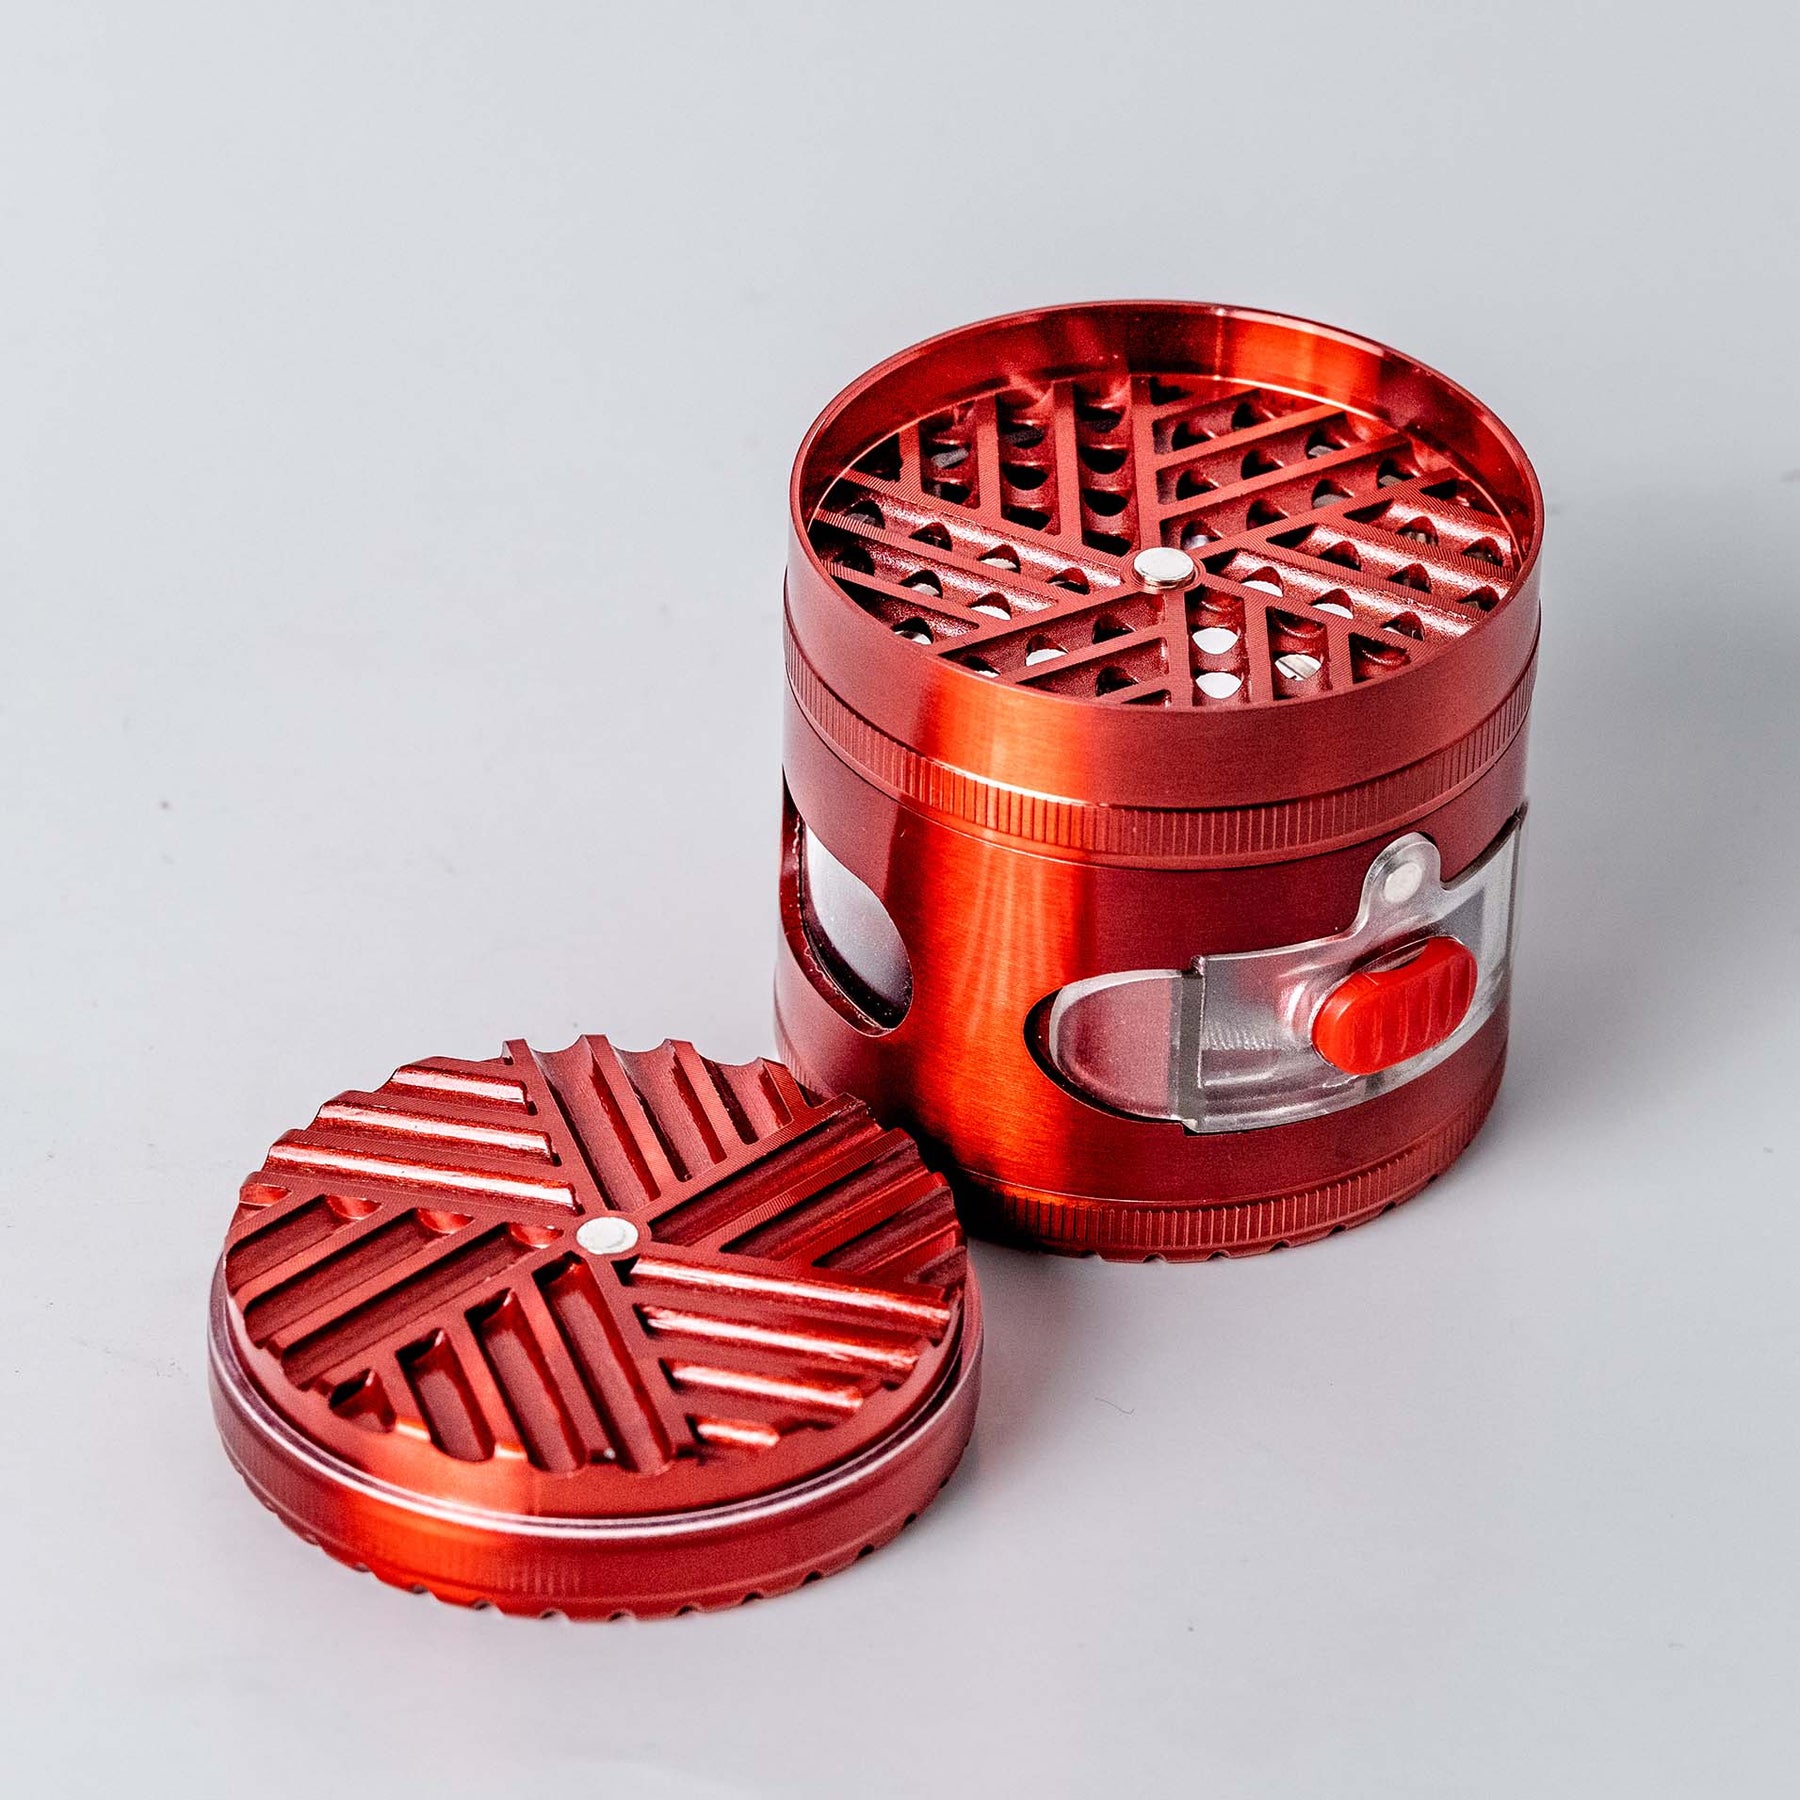 Mirage Grinder with Top Ashtray Red 4-Piece